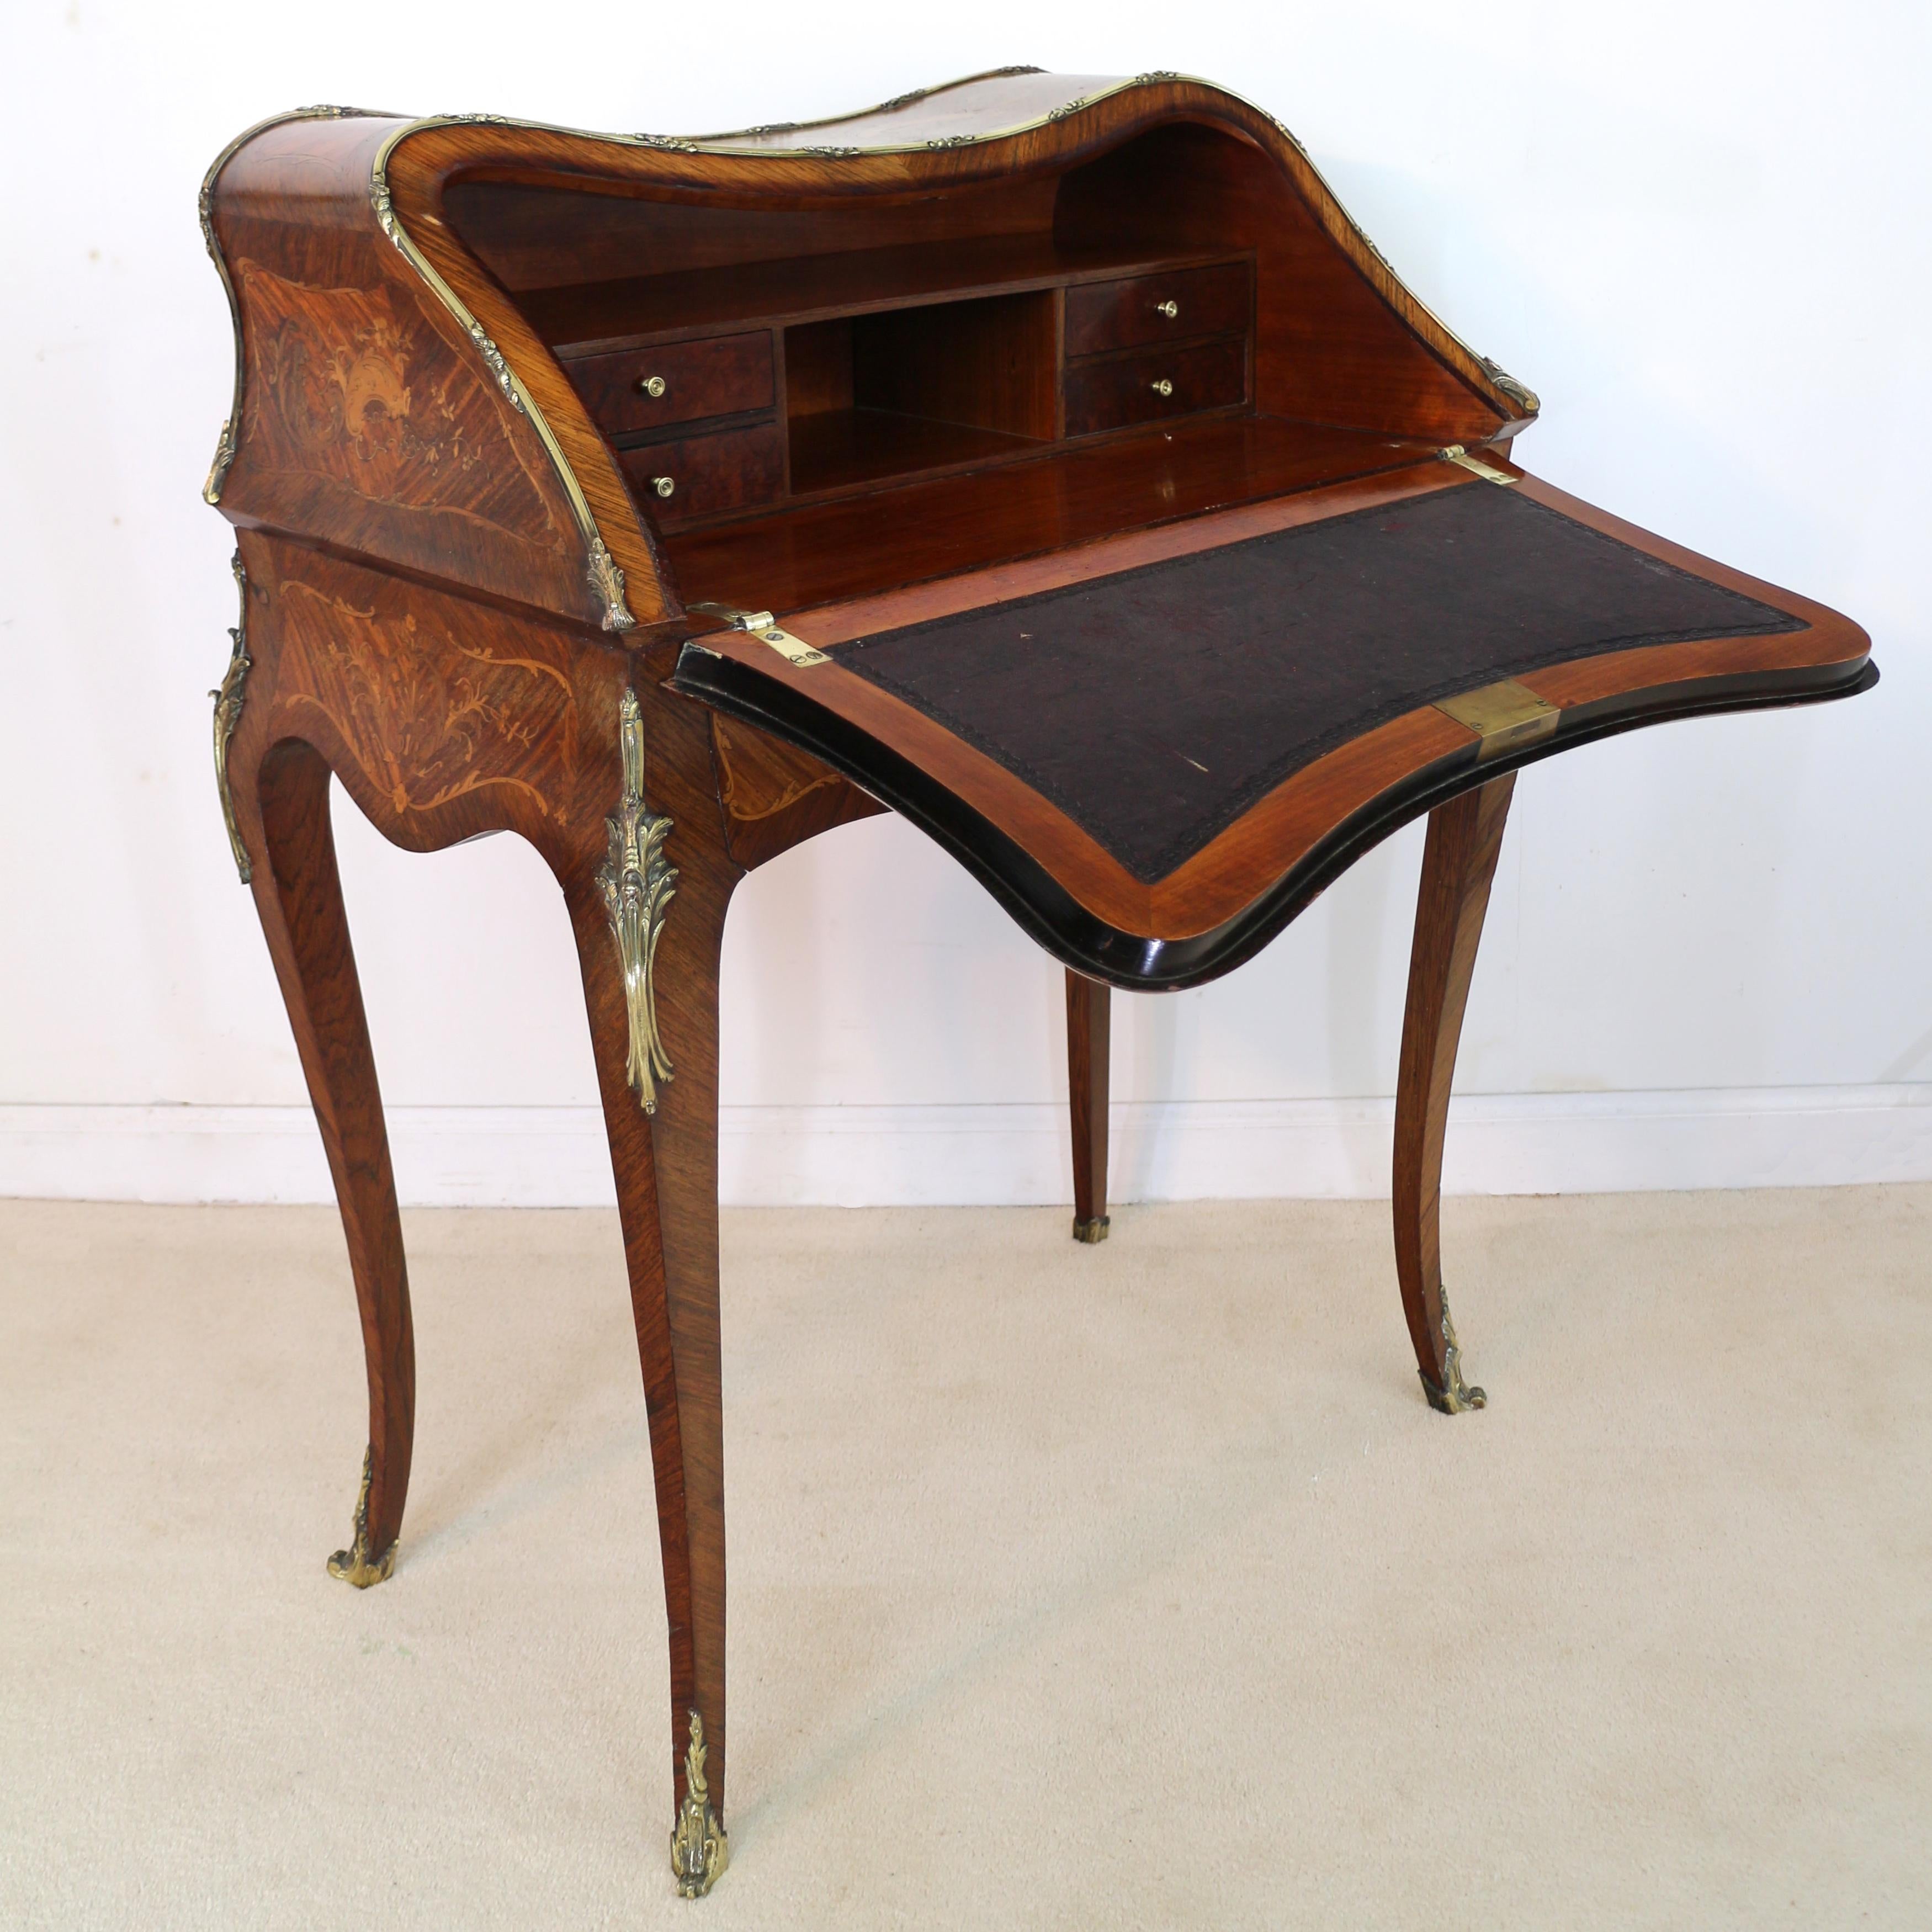 Antique French Louis XV Style Kingwood and Marquetry Bureau de Dame For Sale 9